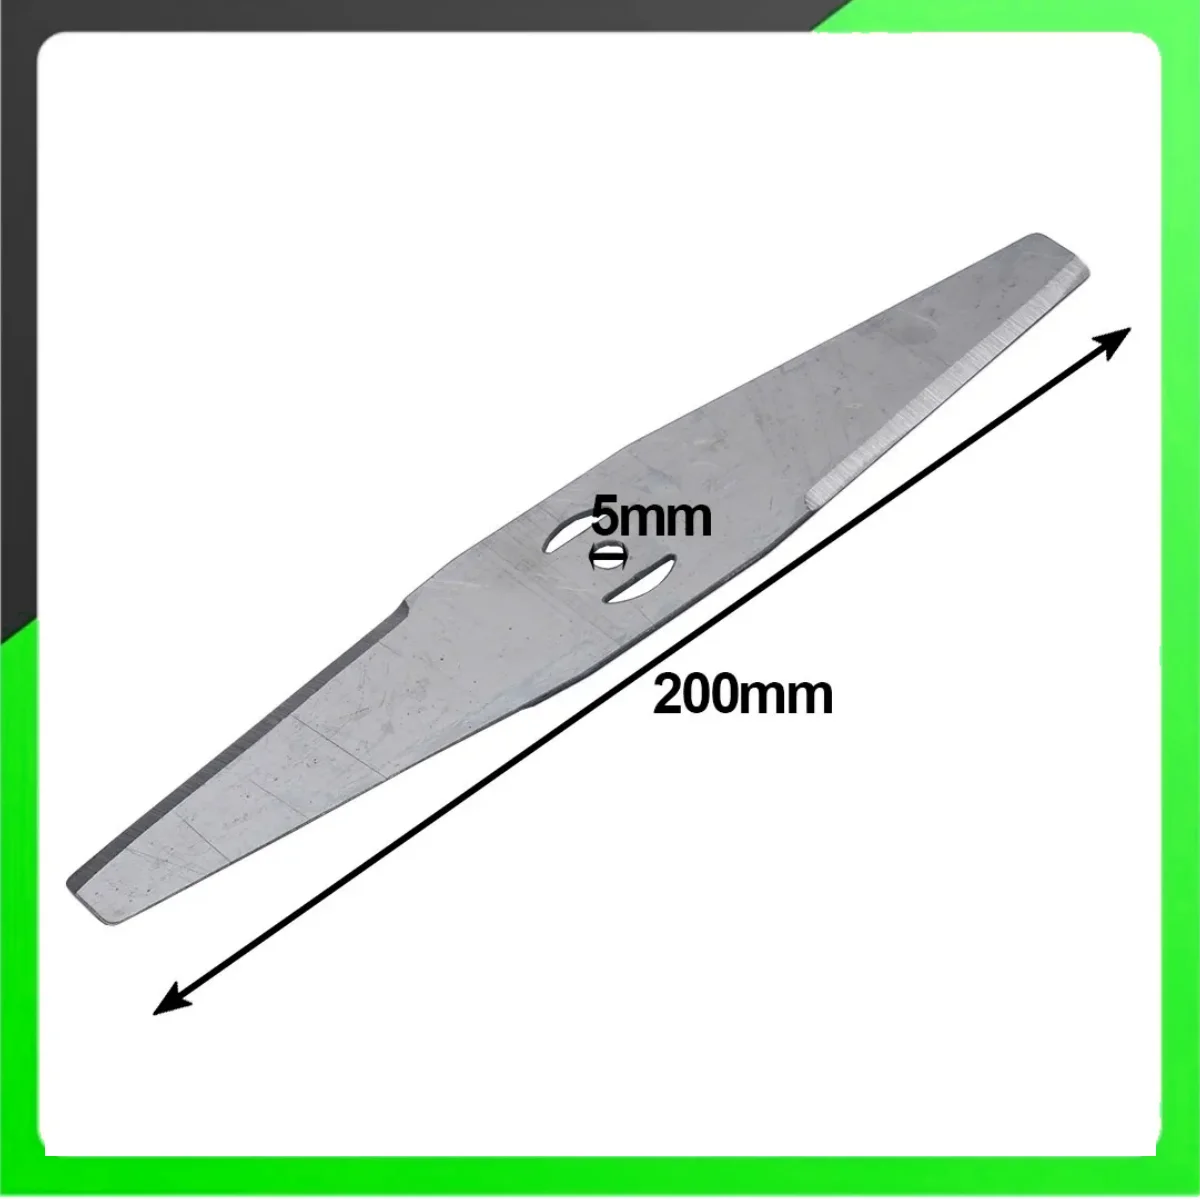 

Metal Grass String Trimmer Head Blade 200mm Steel Replacement Saw Blades Lawn Mower Slotted-Knife Garden Tool Parts